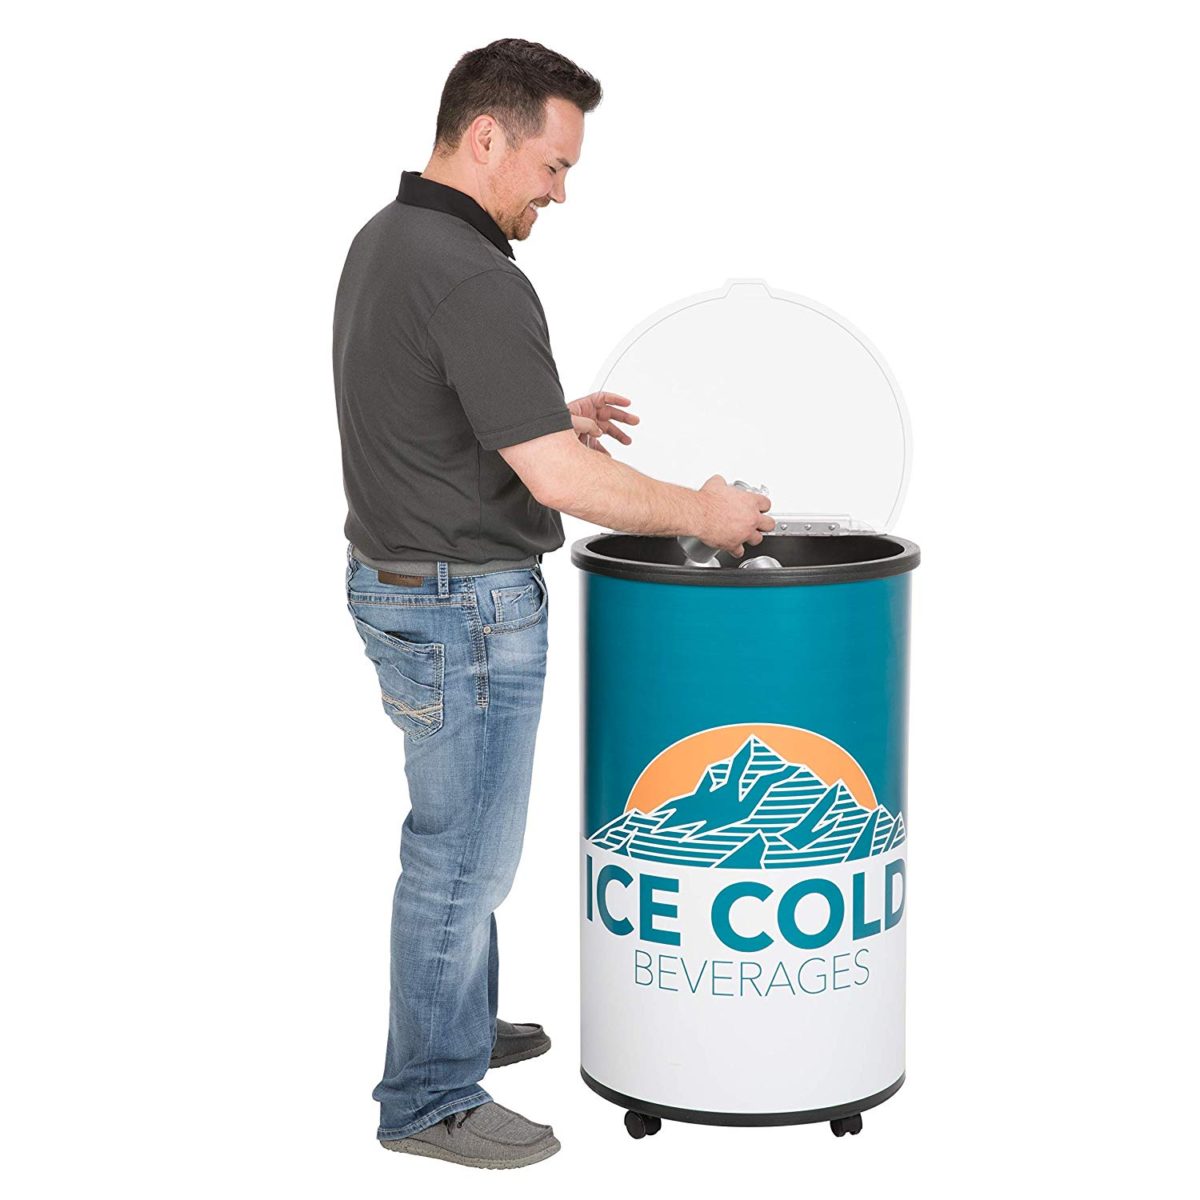 Round coolers